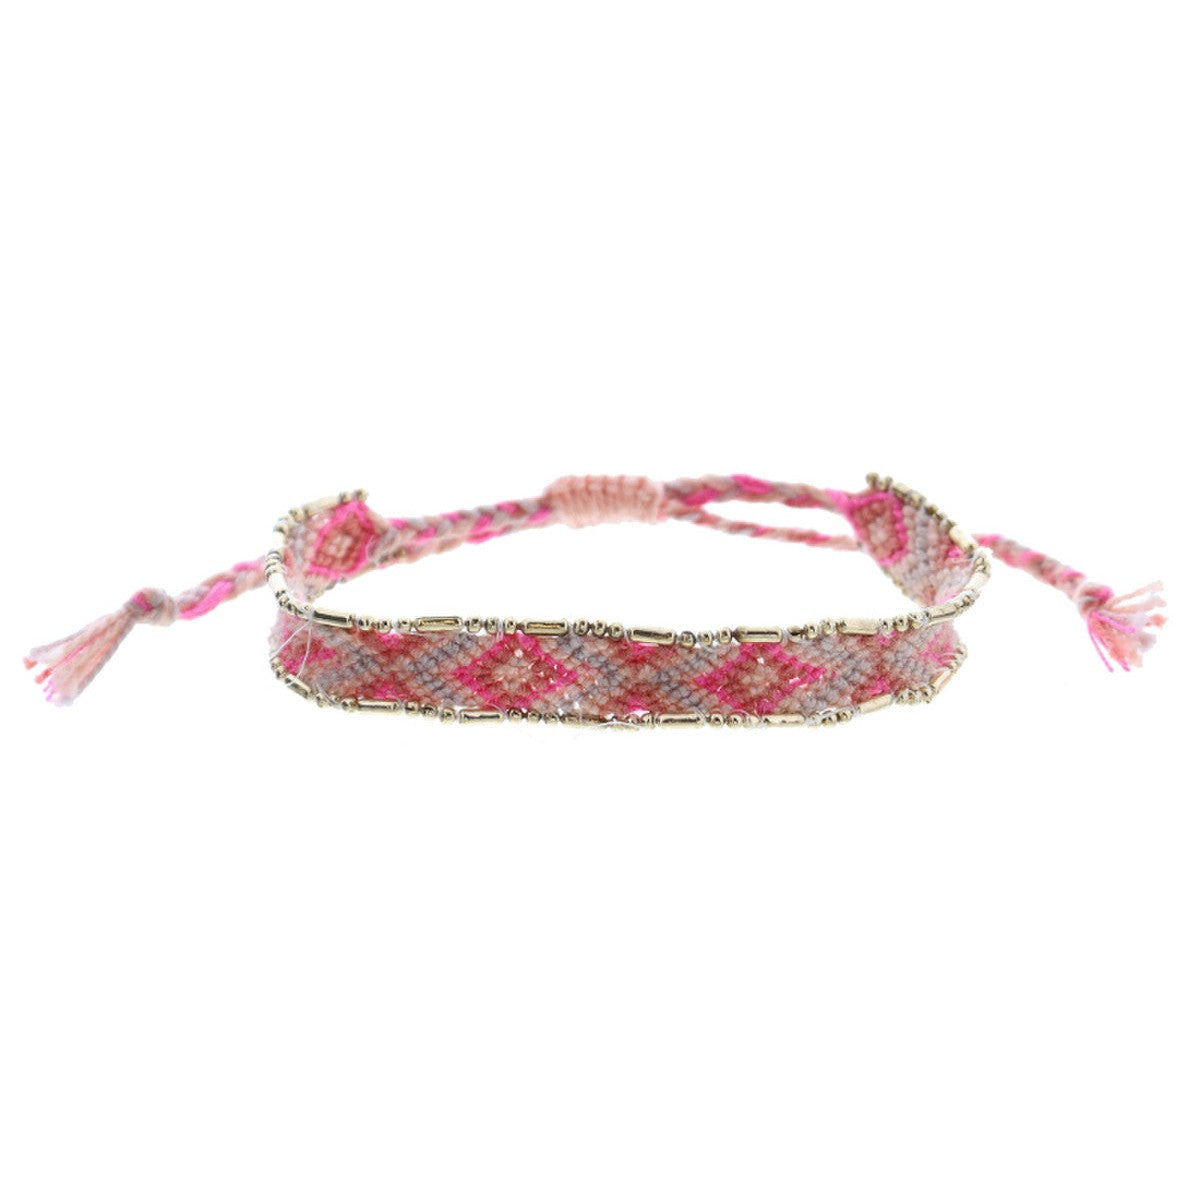 Jane Marie Kids Hot Pink, Coral, Peach, Dusty Lavender Woven Band With Gold Accent Edge Bracelet-JANE MARIE-Little Giant Kidz